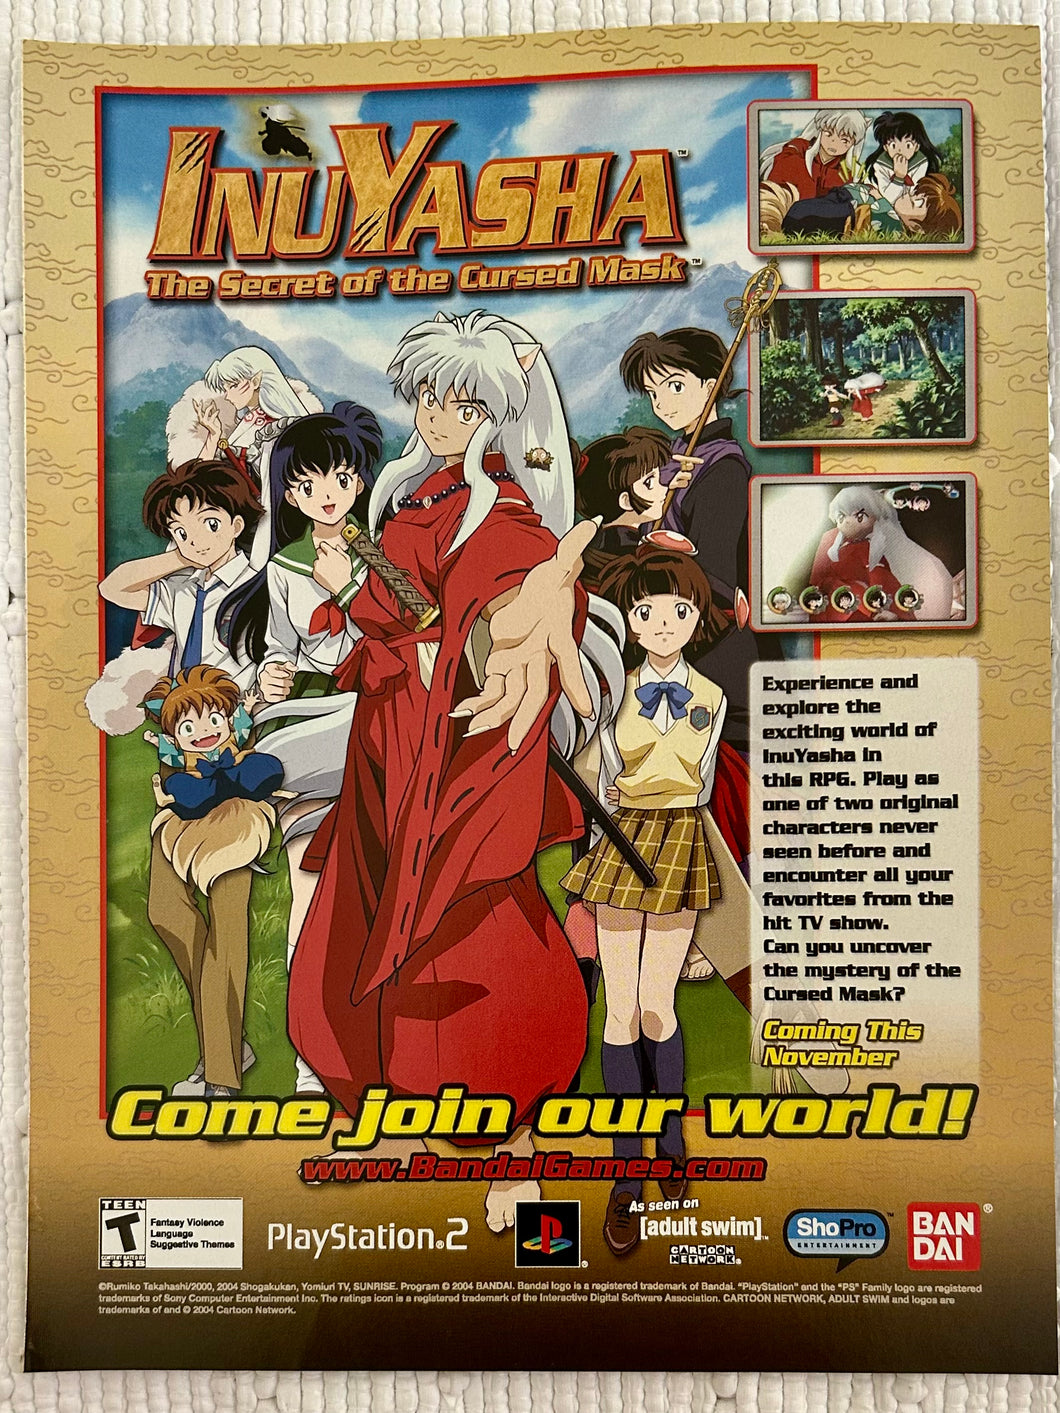 InuYasha: The Secret of the Cursed Mask - PS2 - Original Vintage Advertisement - Print Ads - Laminated A4 Poster